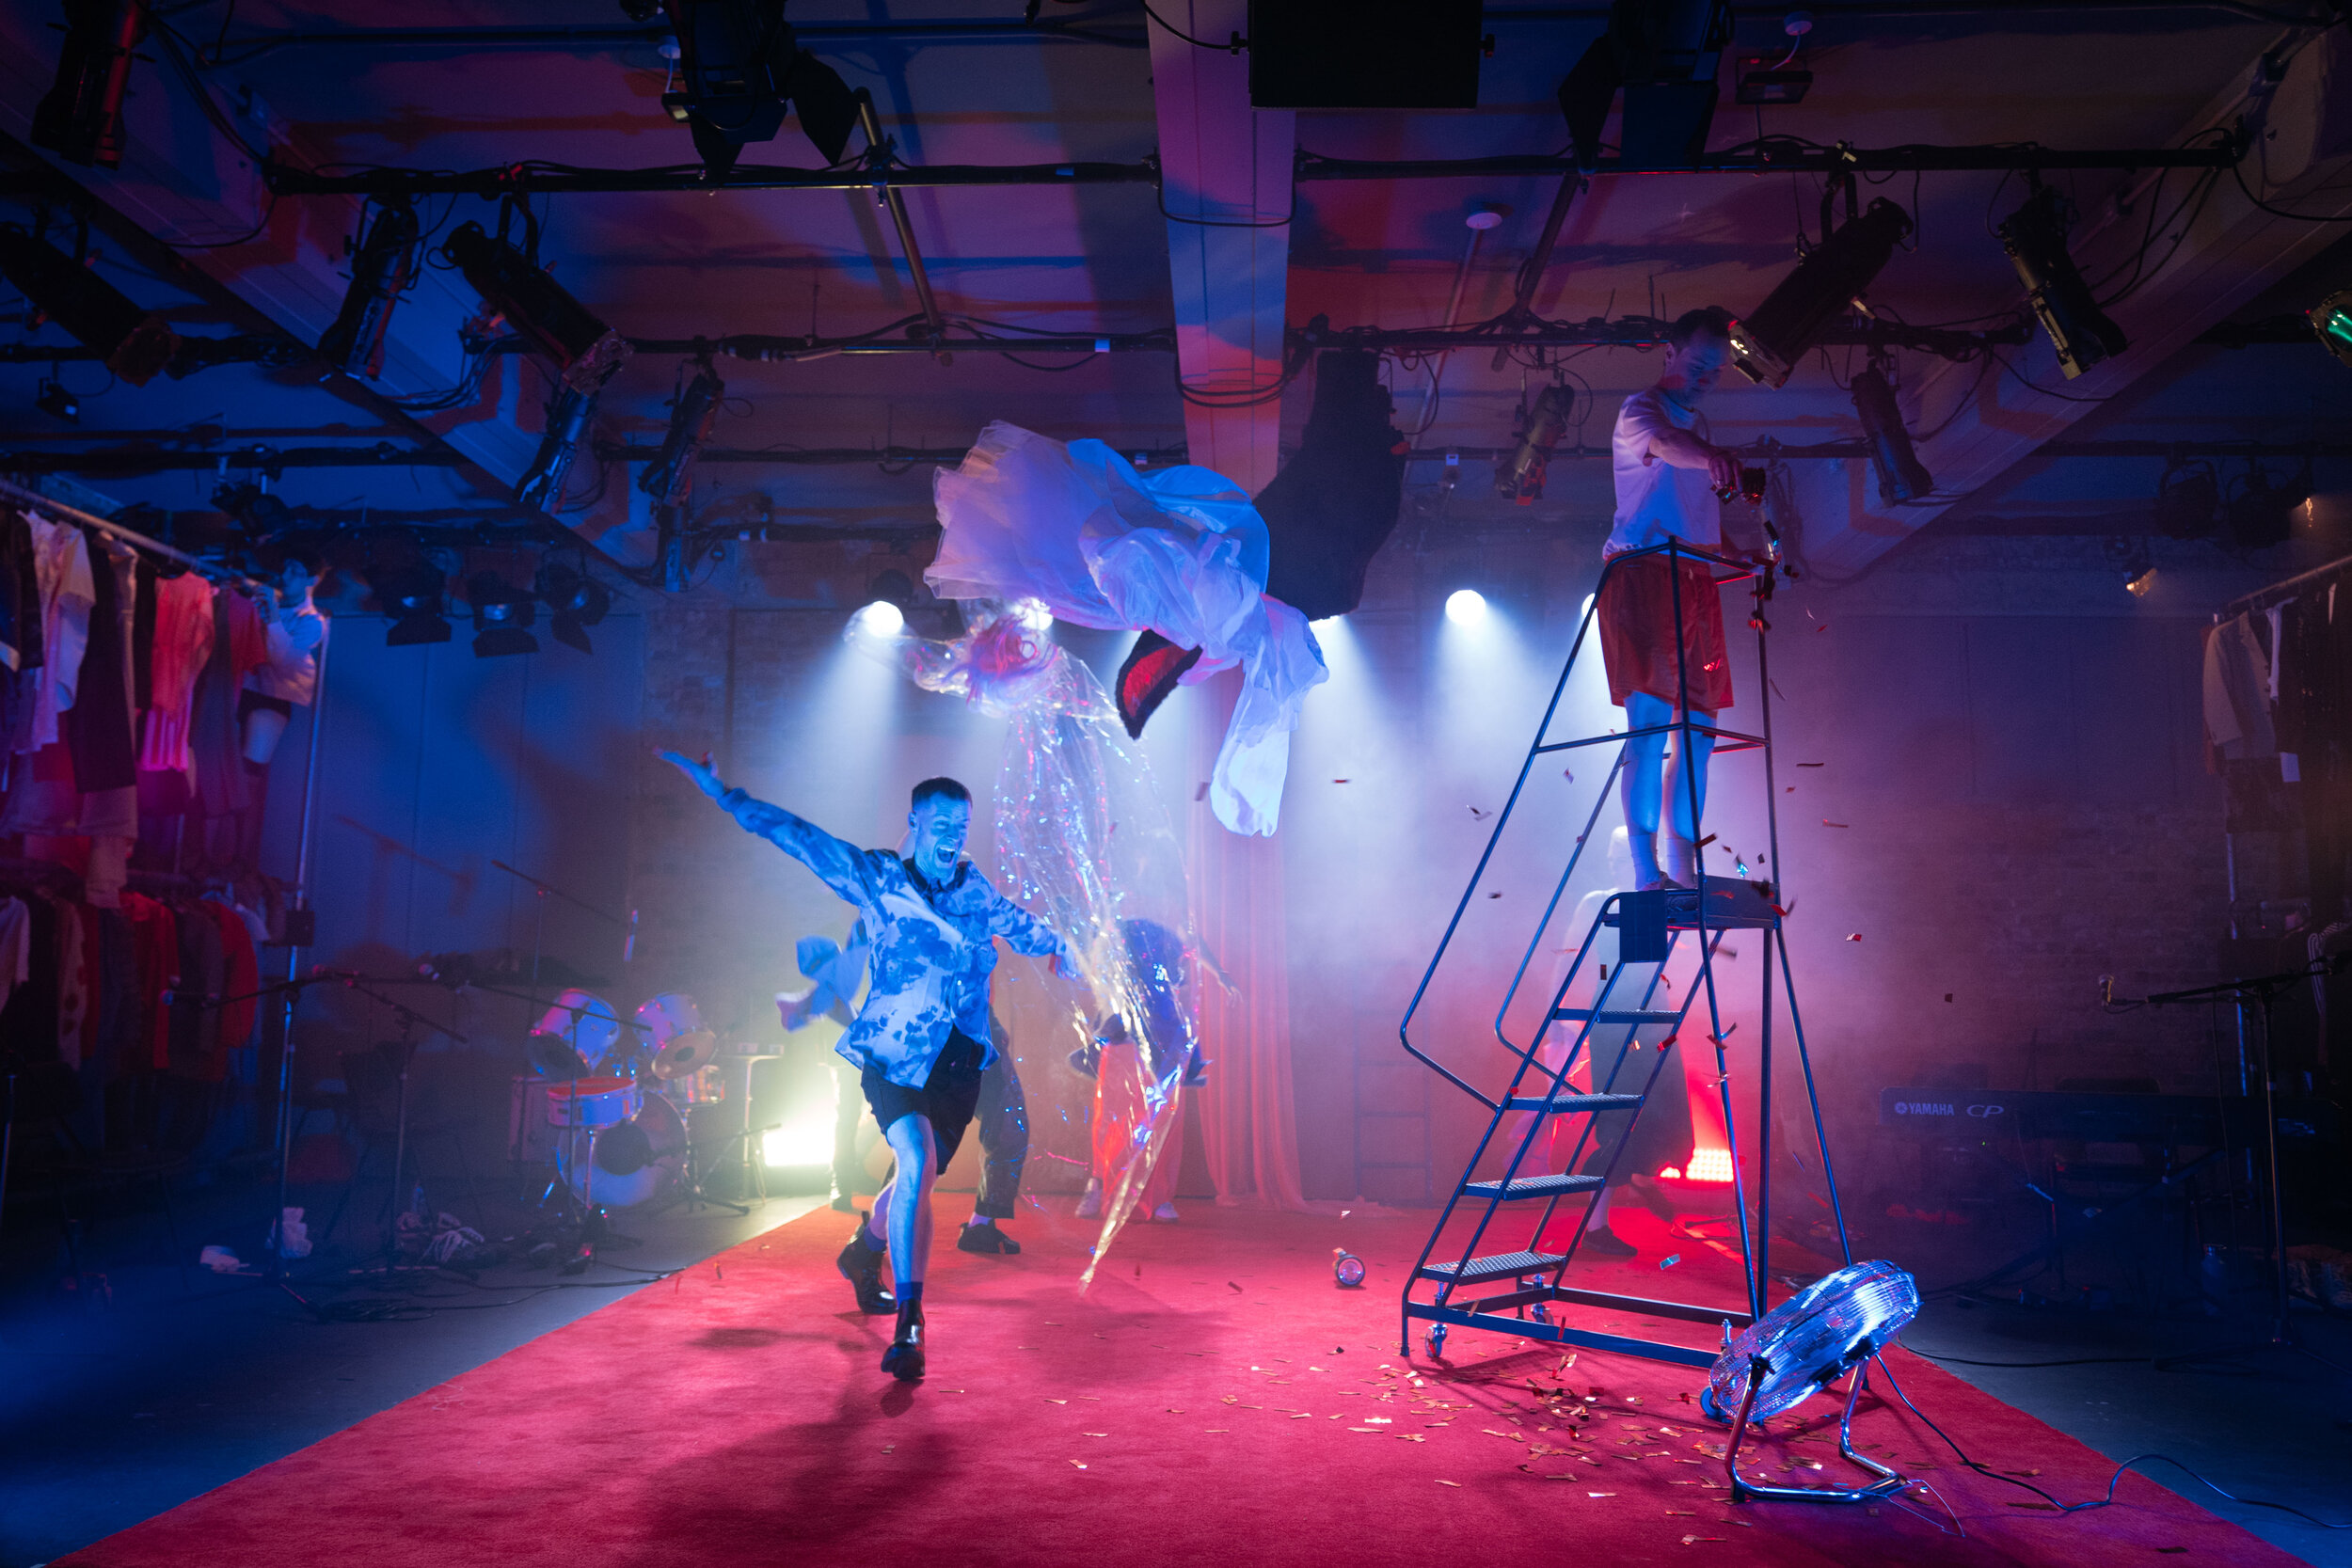 And The Rest Of Me Floats_Outbox Theatre 01(credit HelenMurray).jpg